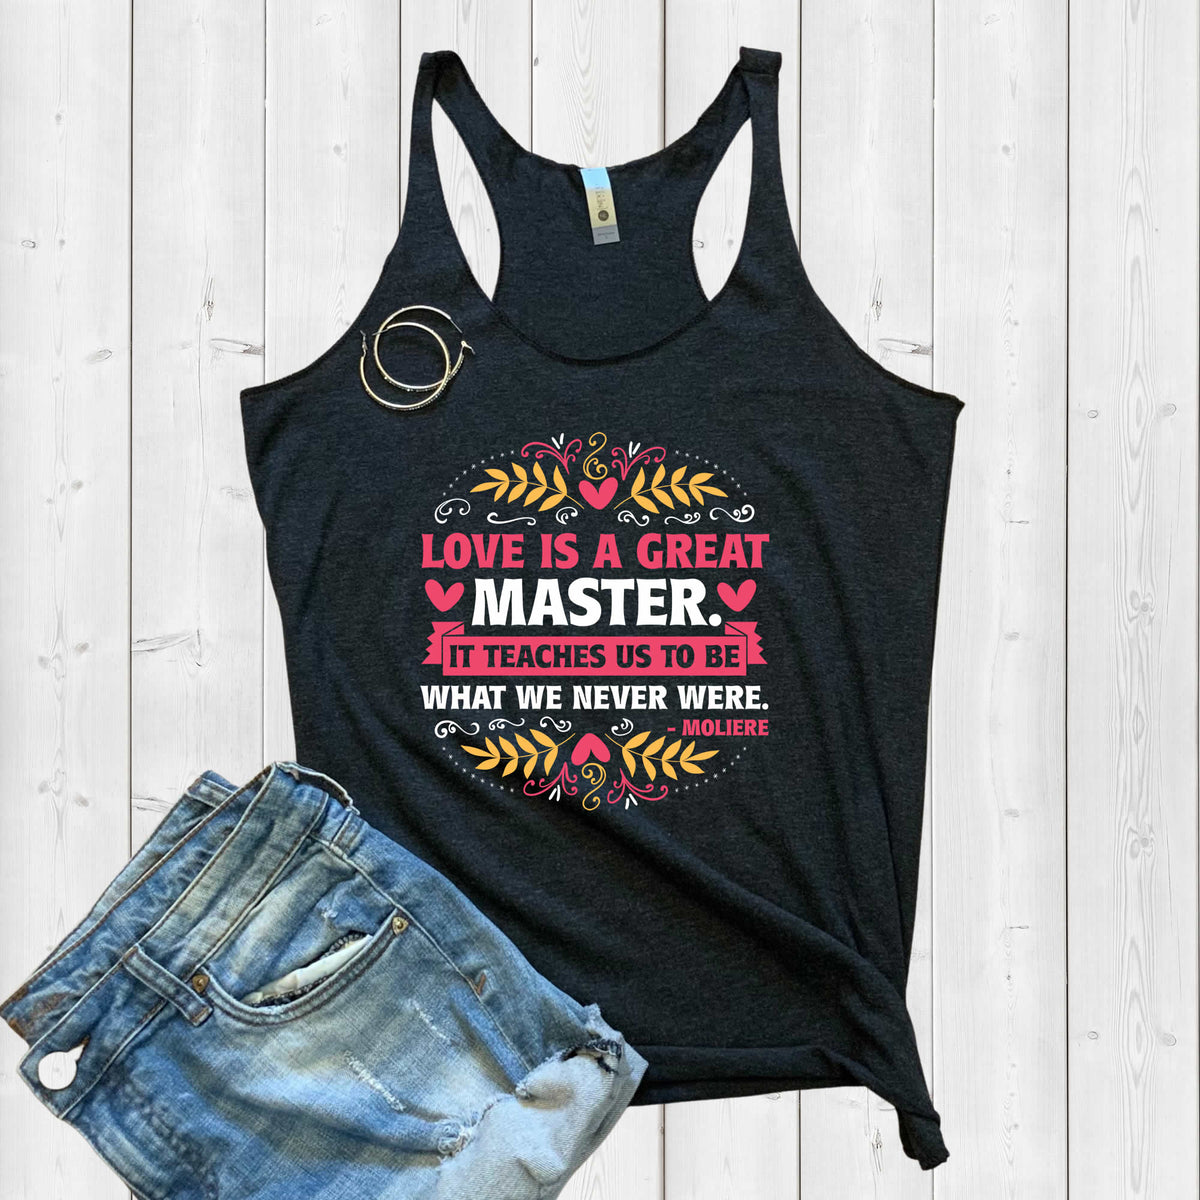 Love Is a Great Master Valentine's Day Shirt | Moliere Literary Quote | Women's Tri-blend Racerback Tank Top